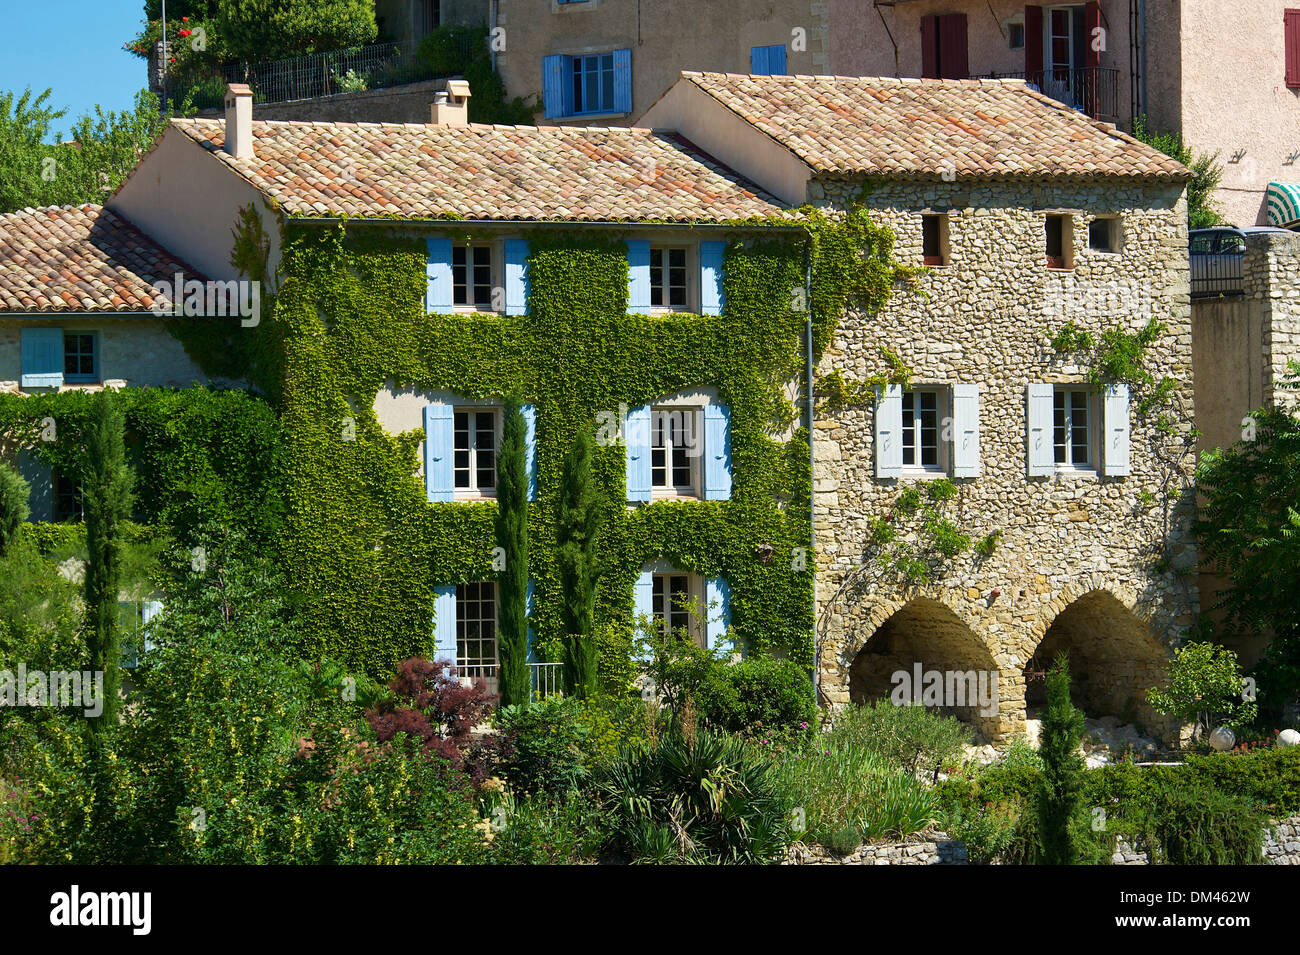 France Europe Provence South of France Aurel view town city houses homes buildings architecture house facades building facades Stock Photo